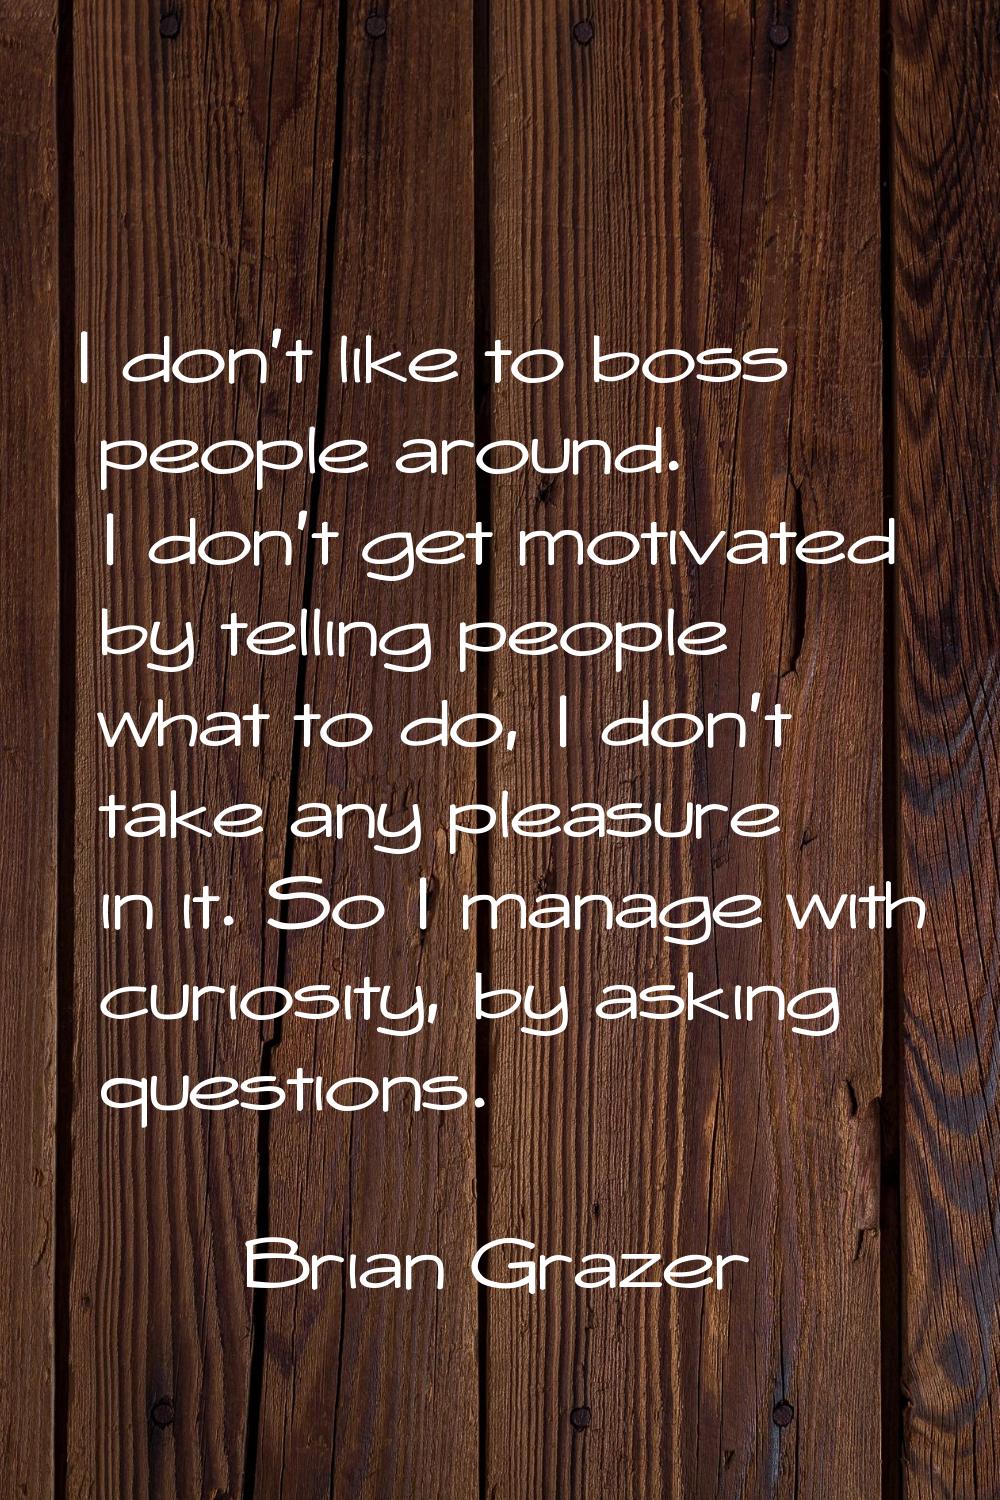 I don't like to boss people around. I don't get motivated by telling people what to do, I don't tak